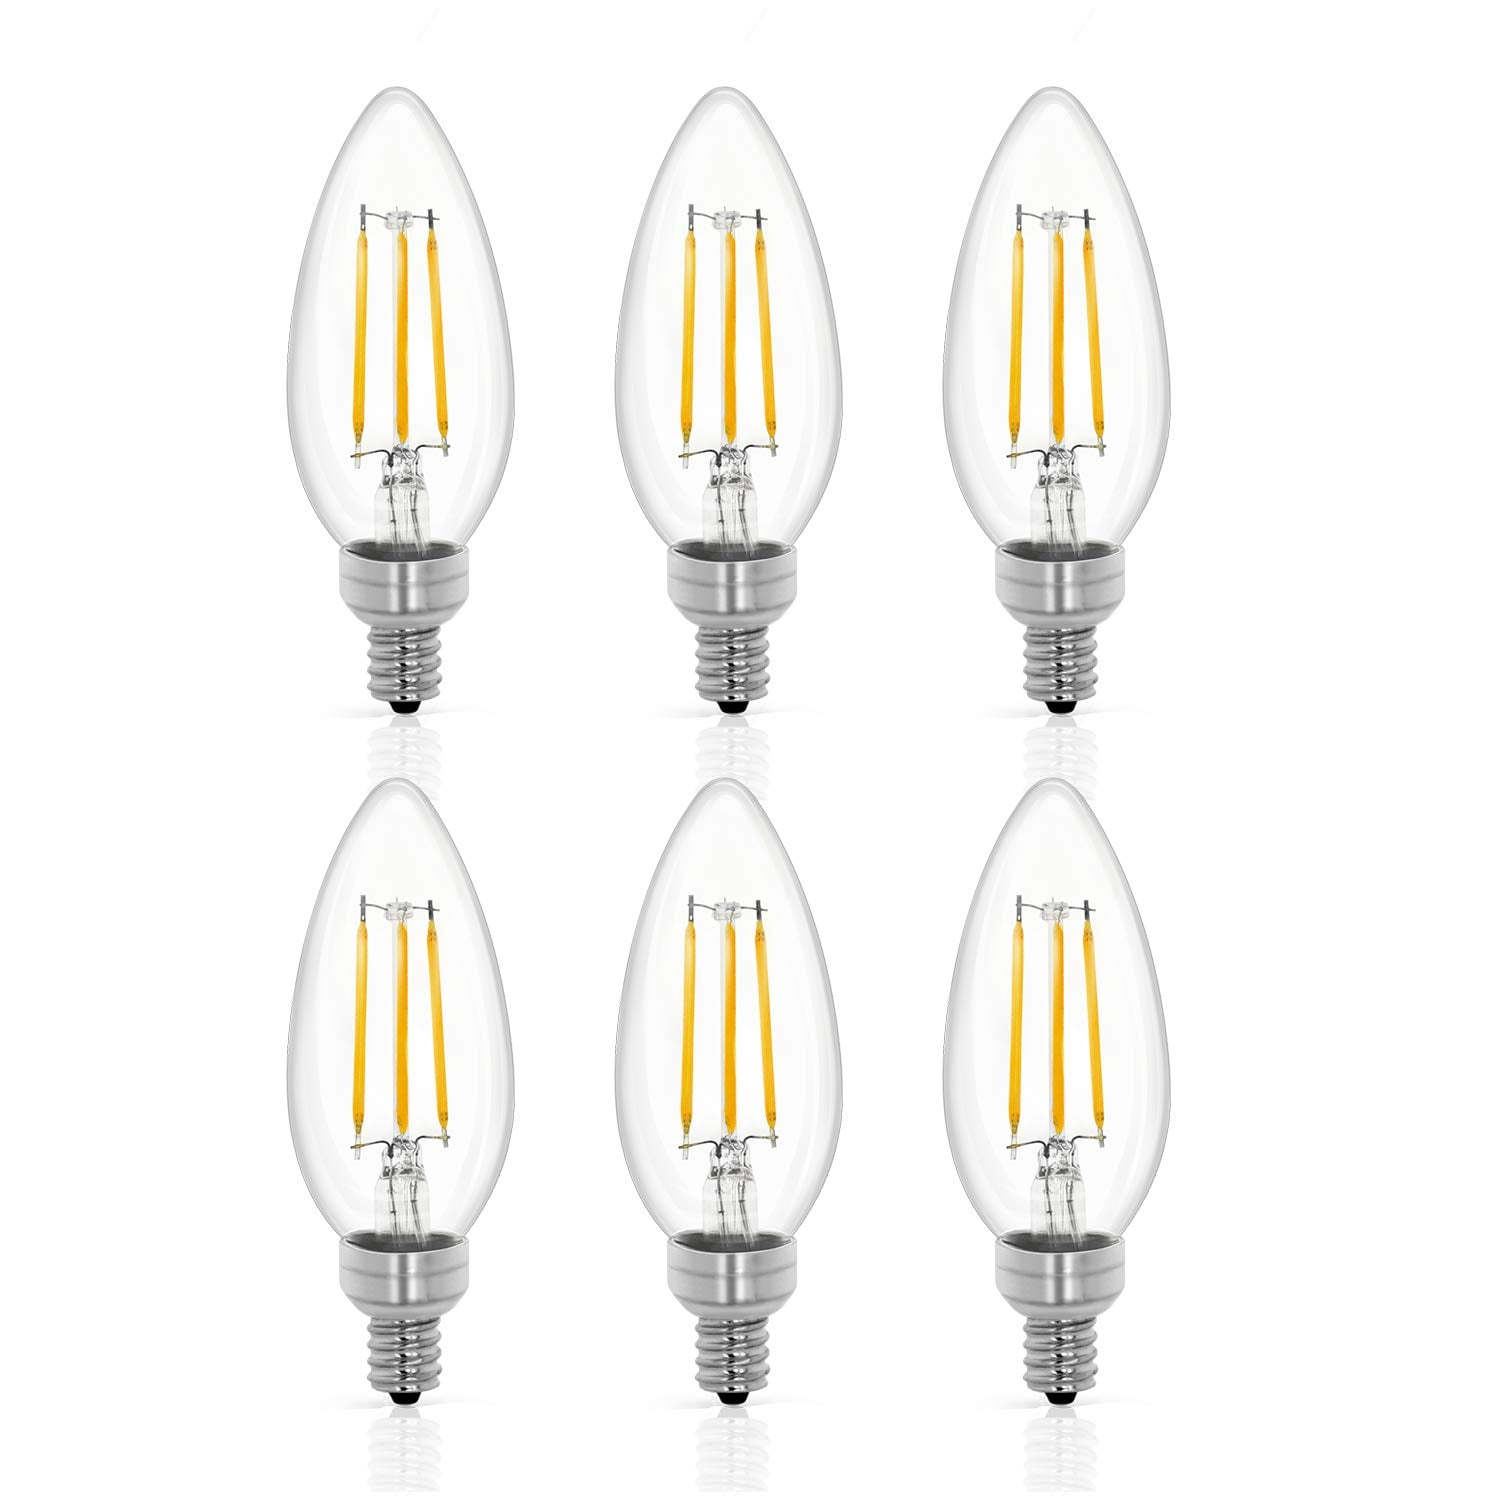 Chandelier Indoor/Outdoor BE12-5WW-6 Warm White 40 Watt using only 5 Watts 6 Pack Bioluz LEDFlame Tip Dimmable Candelabra LED E12 Candelabra Base Candle Bulbs 2700K 